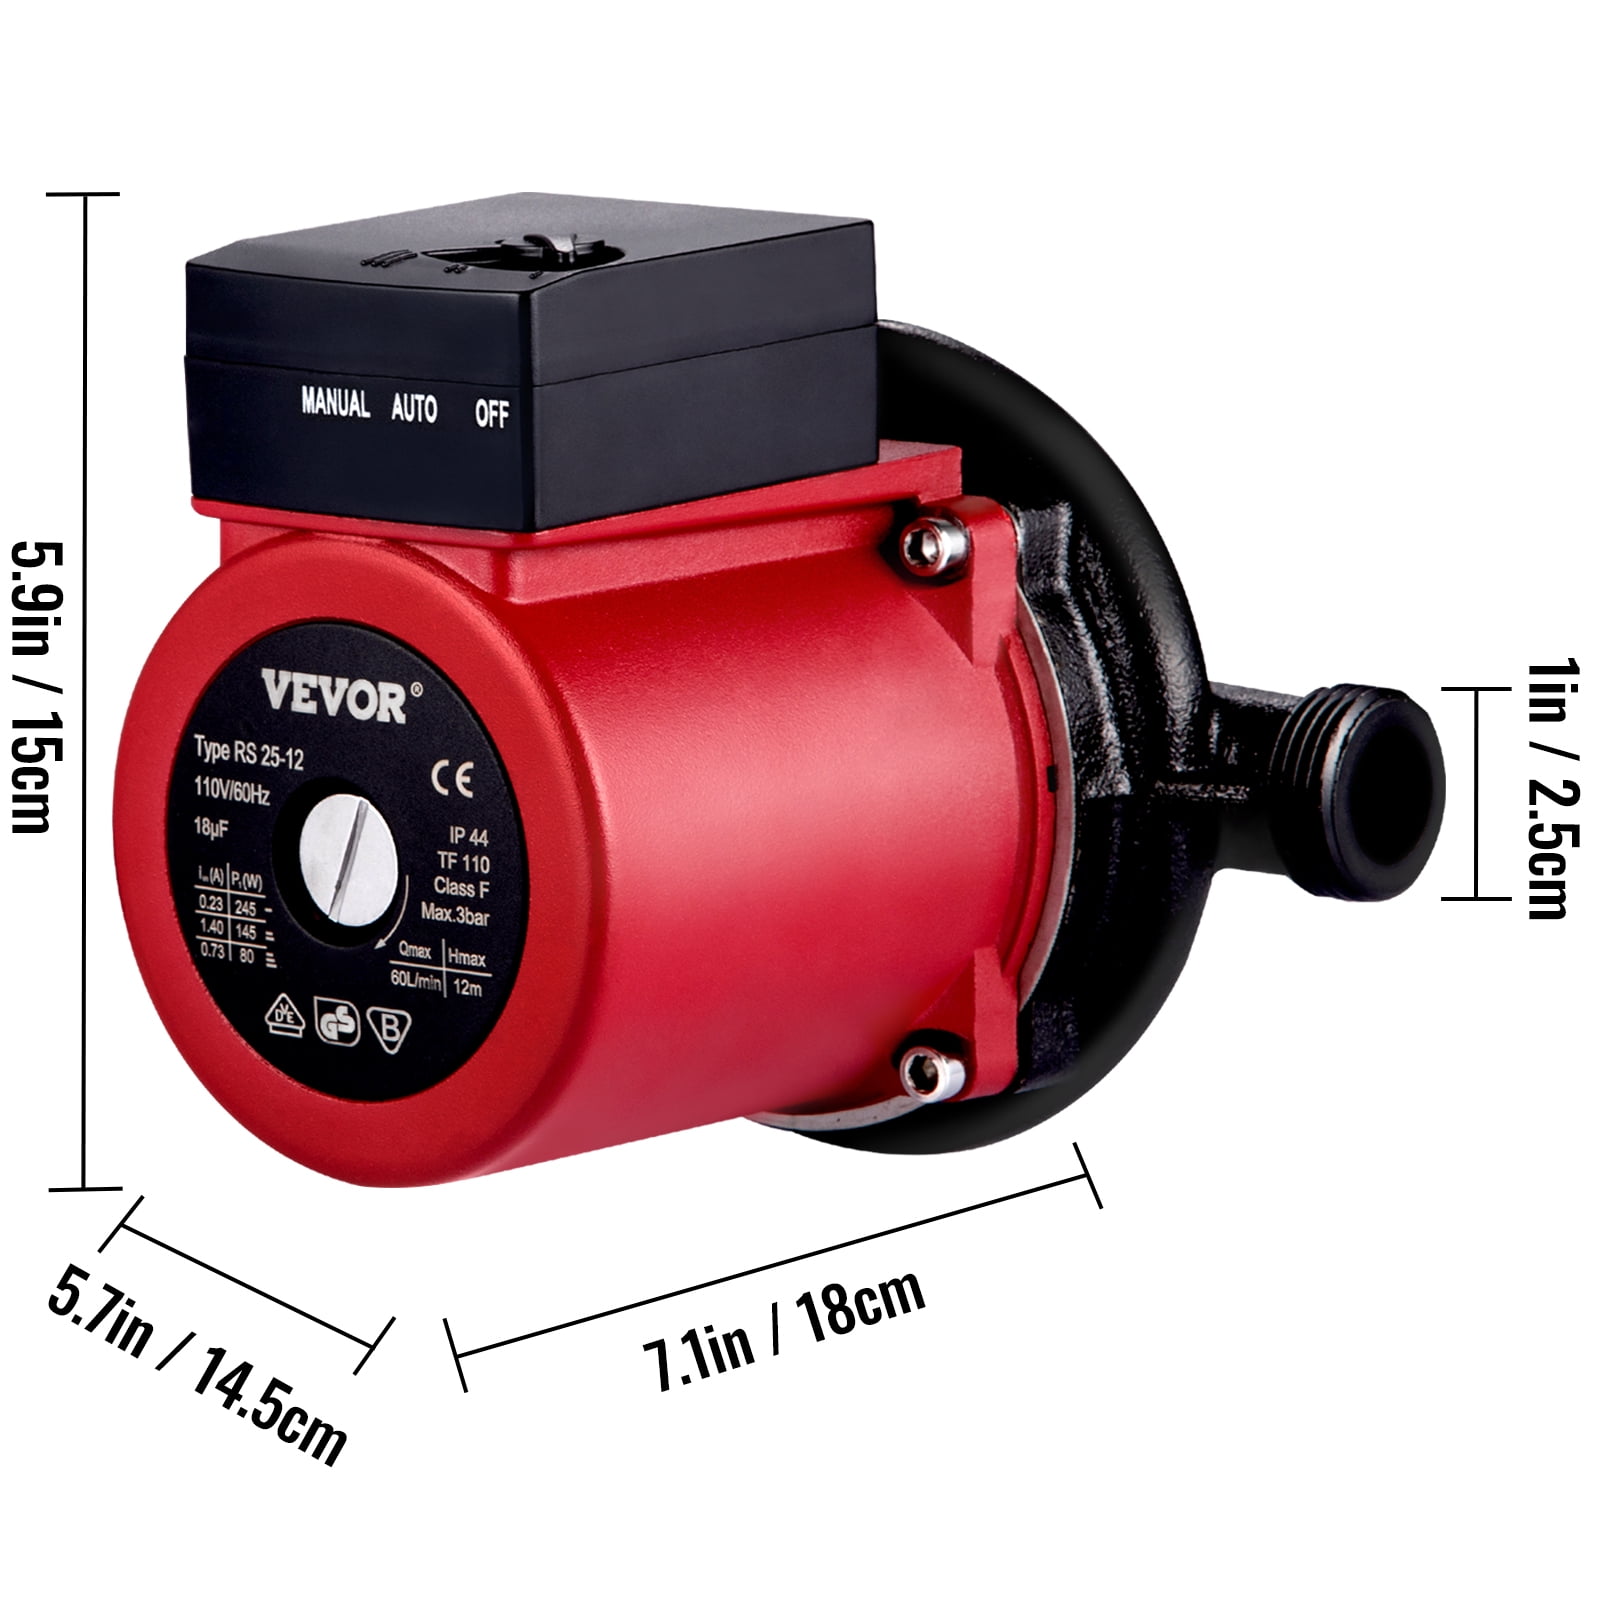 VEVOR Recirculating Pump, 245w 110v Water Circulator Pump, Automatic Start  Circulating Pump NPT 1 w/Brass Fittings, Heavy-duty Cast Iron Pump Head,  Two Control Mode for Electric Water Heater System 